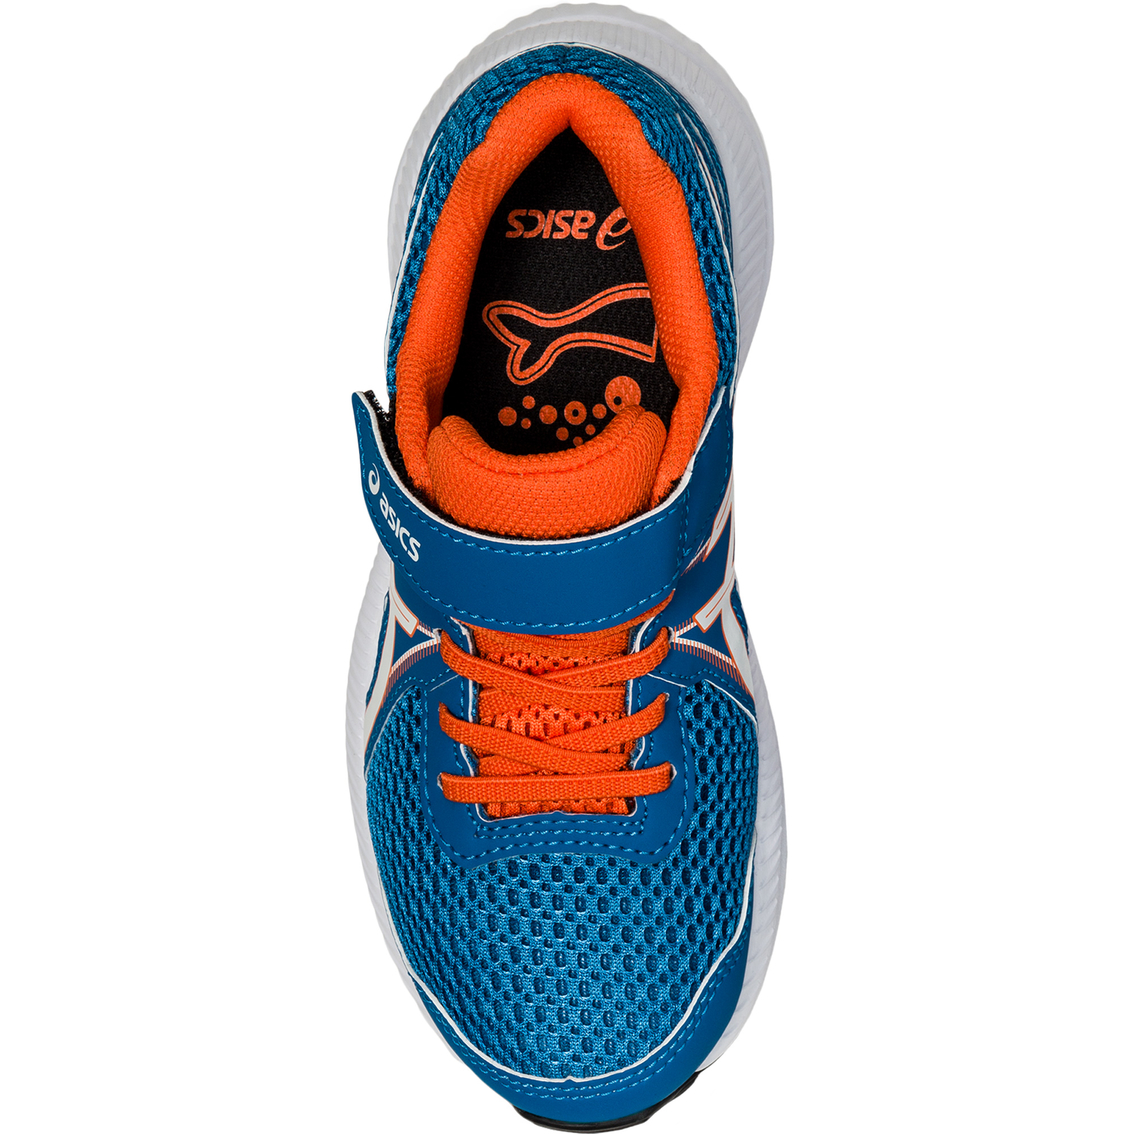 ASICS Preschool Boys Pre Contend 7 Running Shoes - Image 4 of 7